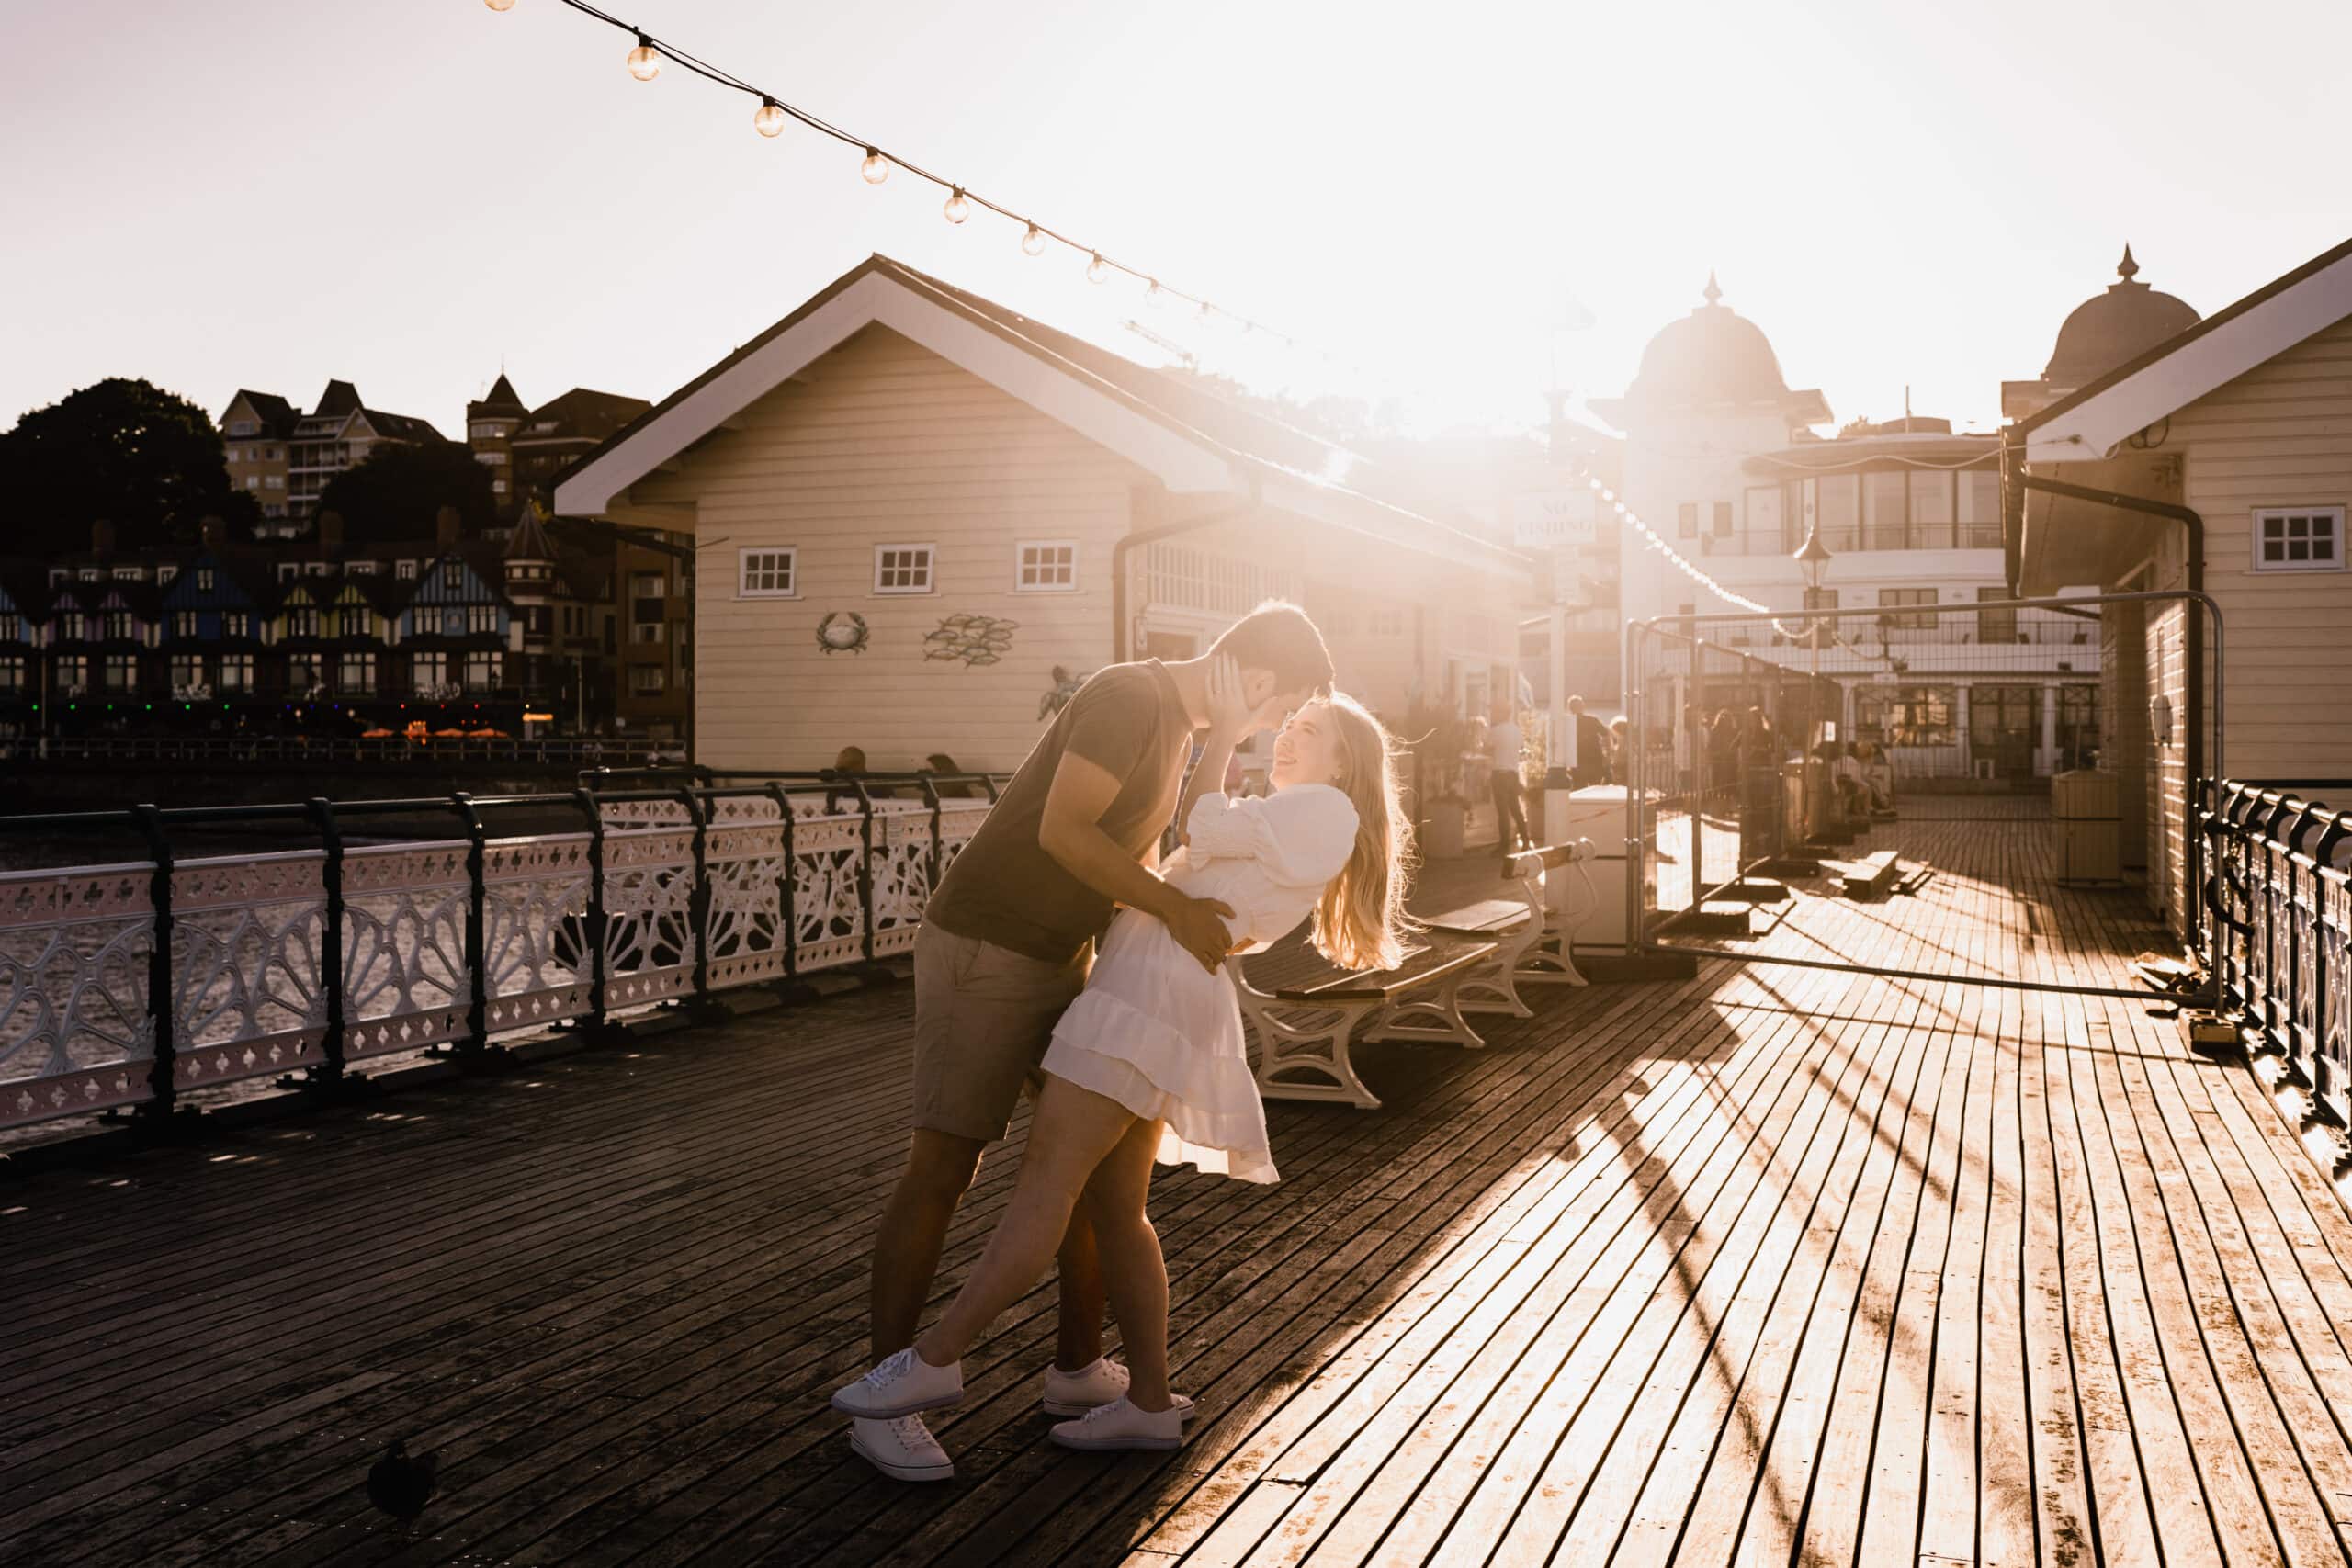 A couple kisses tenderly on a wooden pier at sunset, with soft golden light illuminating the scene and quaint buildings in the background.